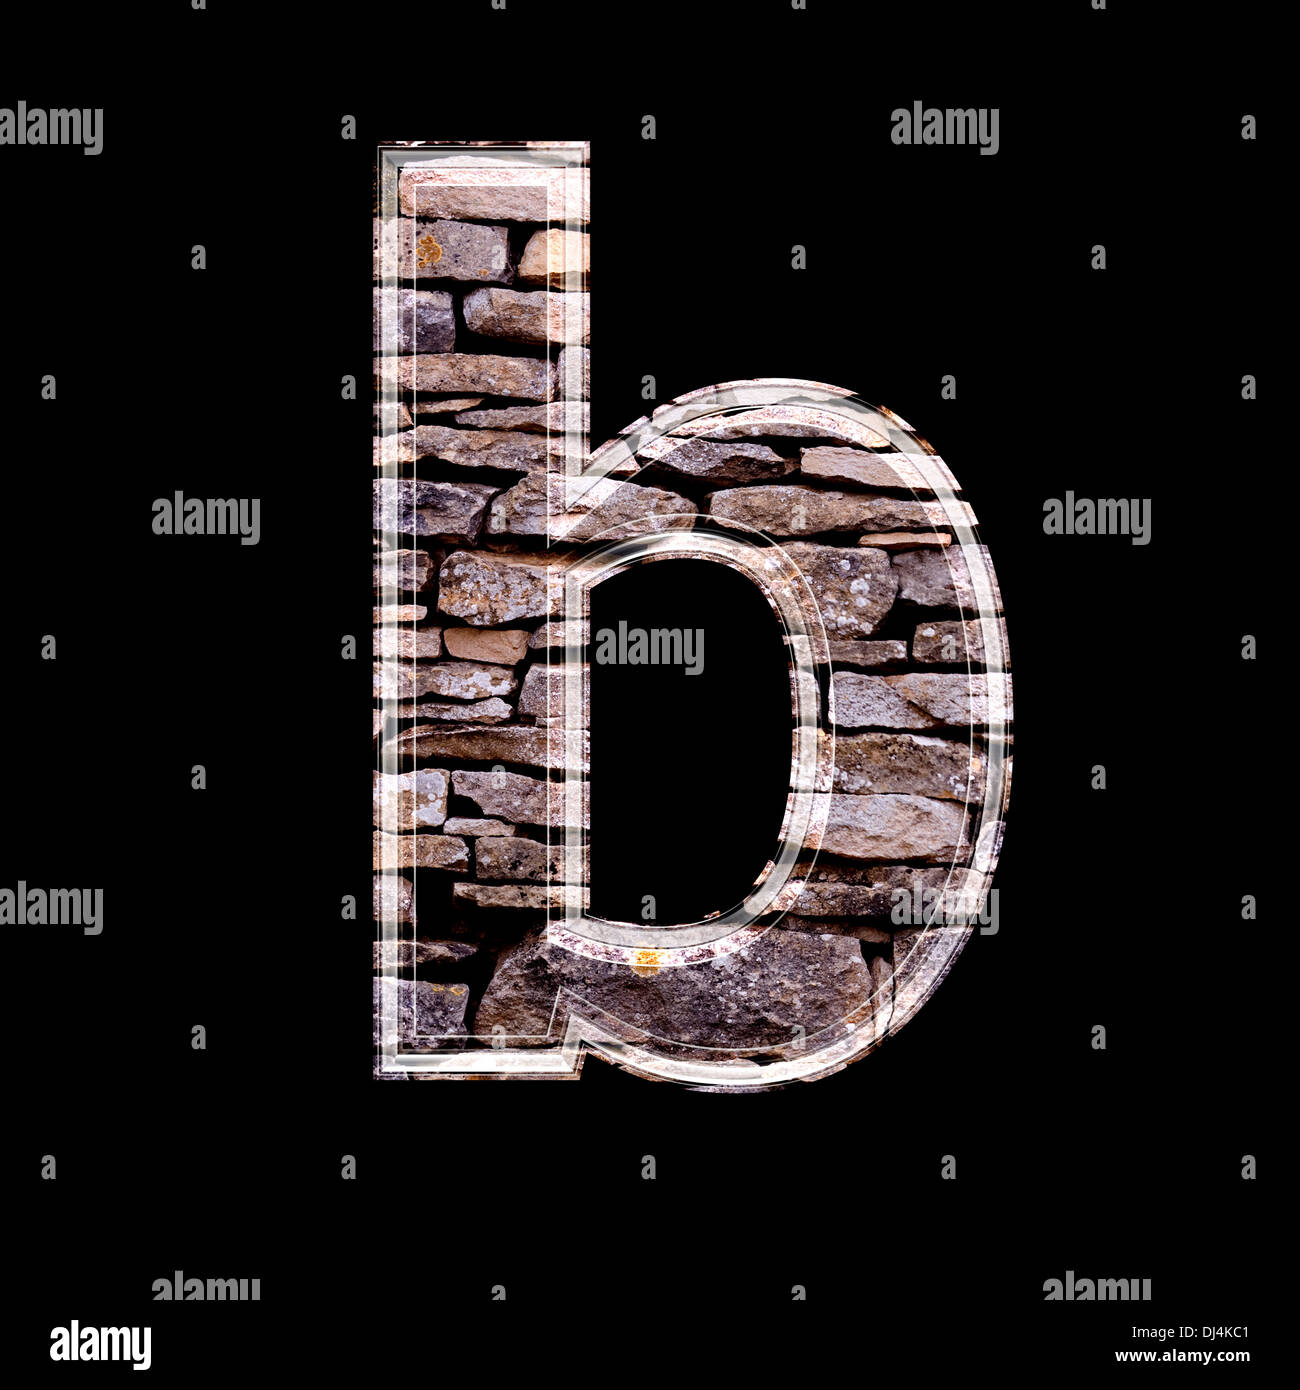 Stone wall 3d letter b Stock Photo